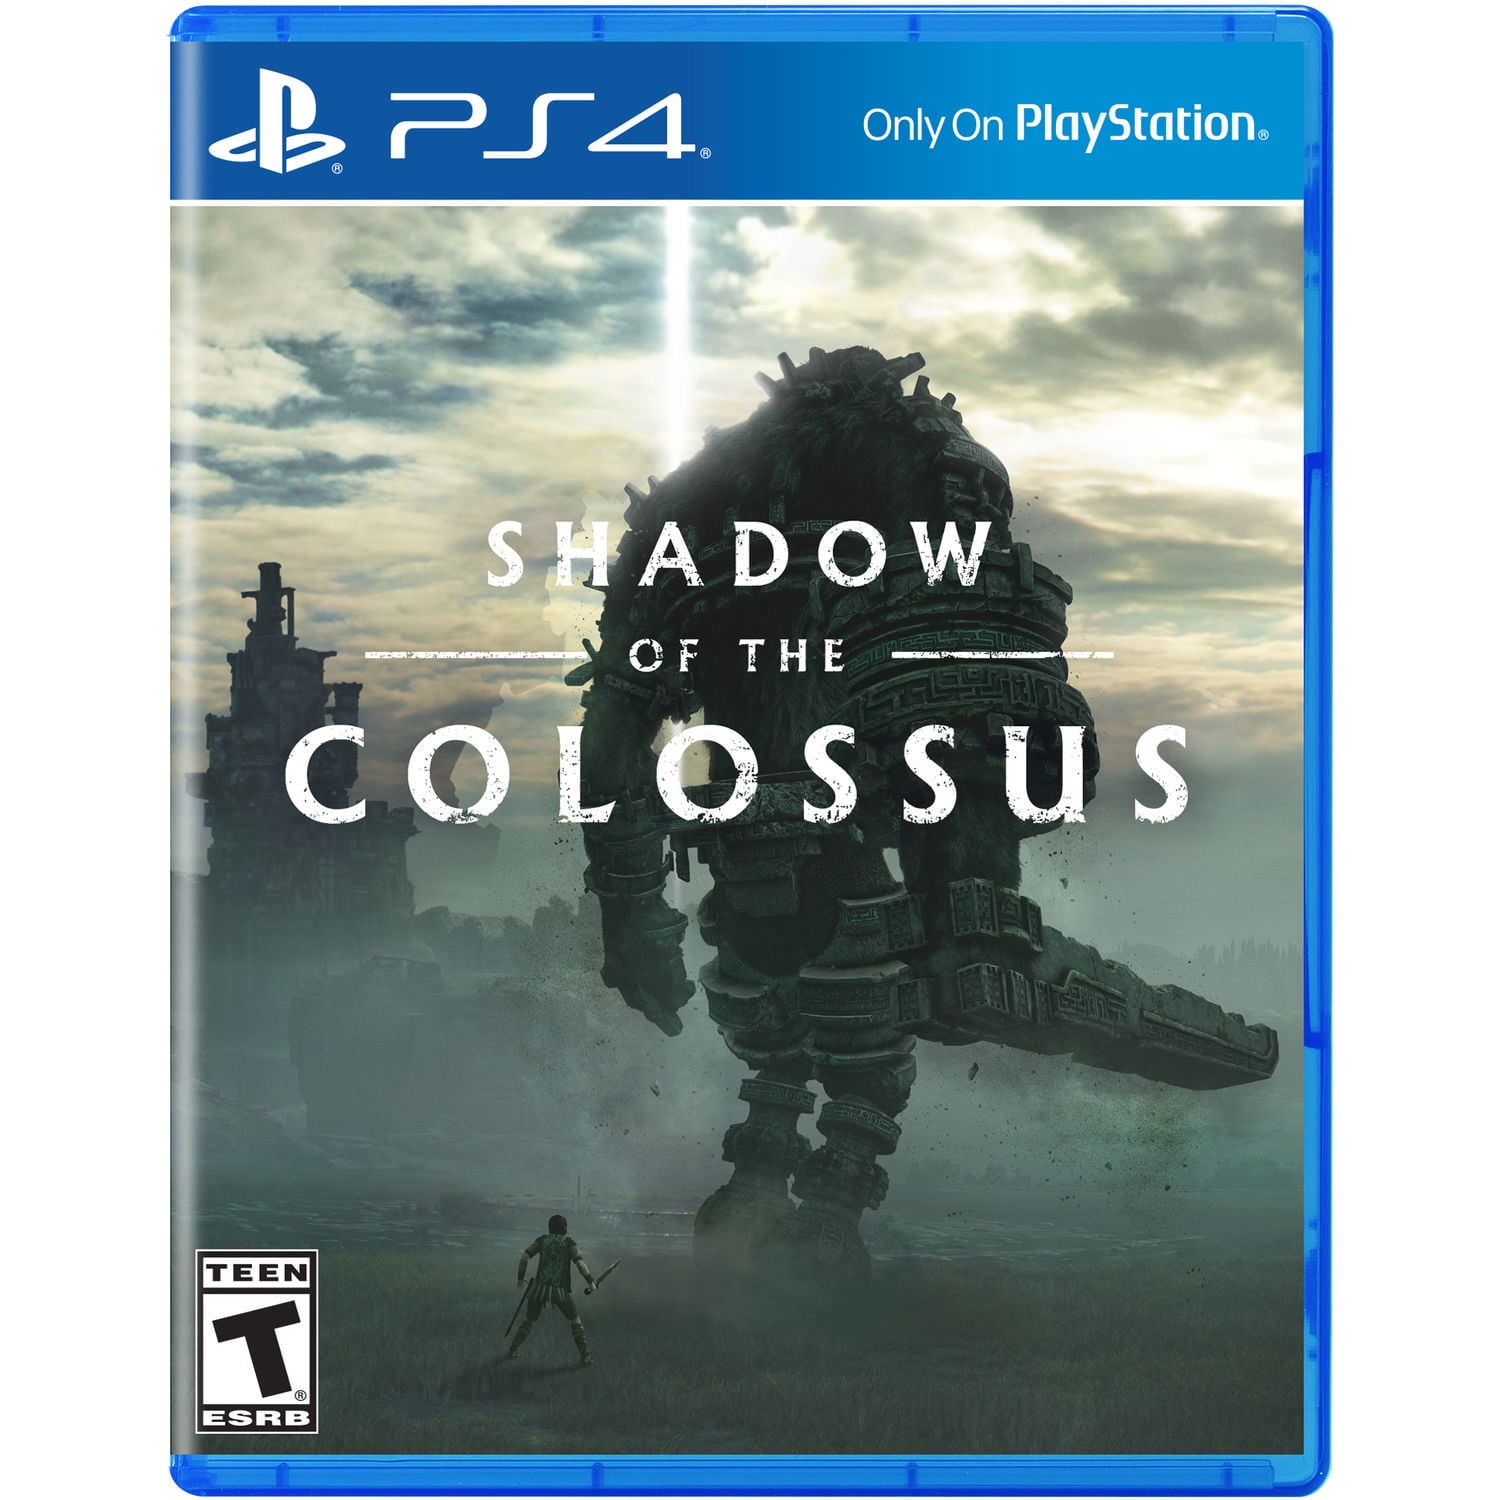 Shadow of the Colossus Original de ps2 ‹Unboxing› 